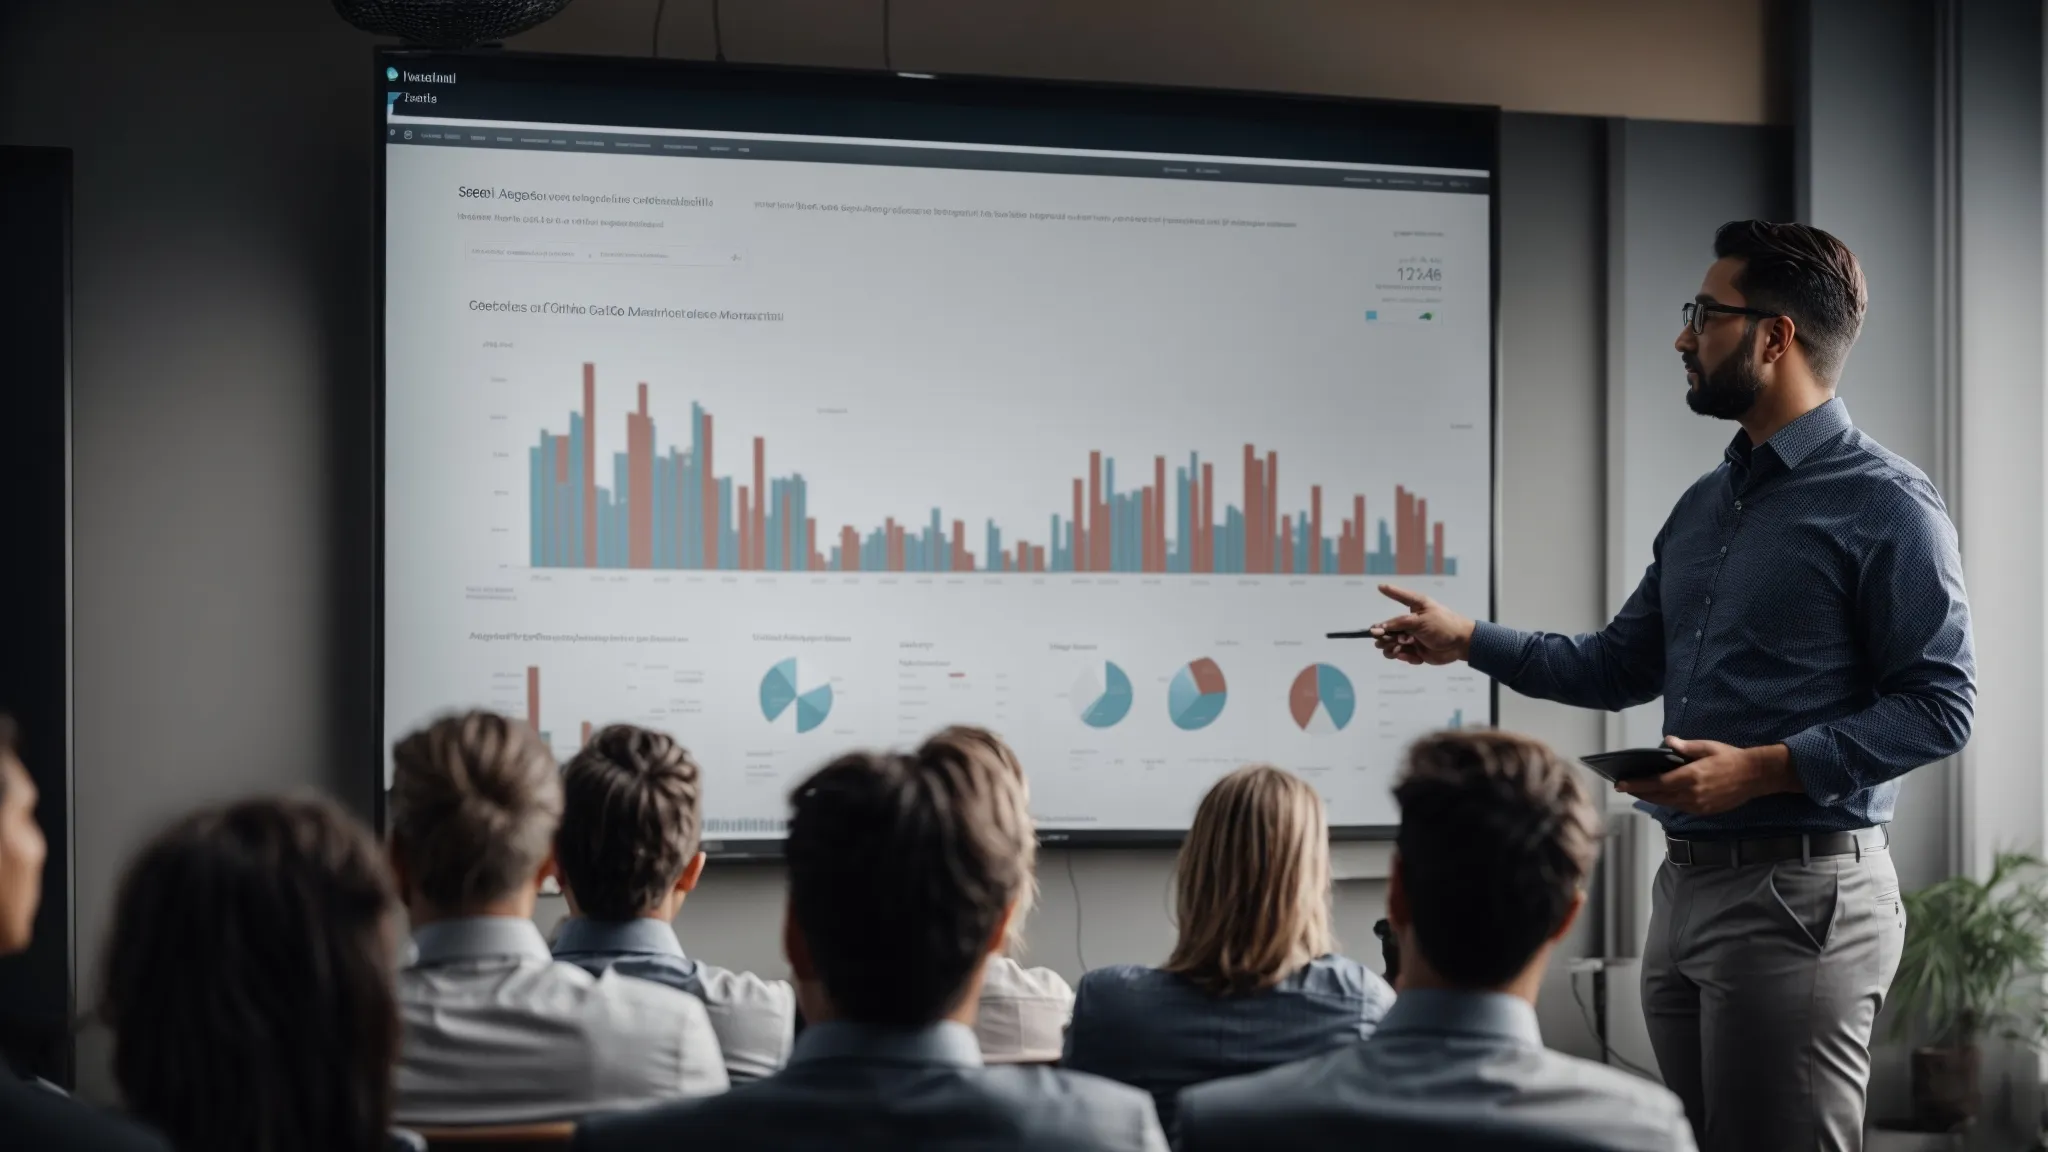 a marketing expert presenting an seo analytics dashboard on a large screen to a group of attentive professionals during a workshop.